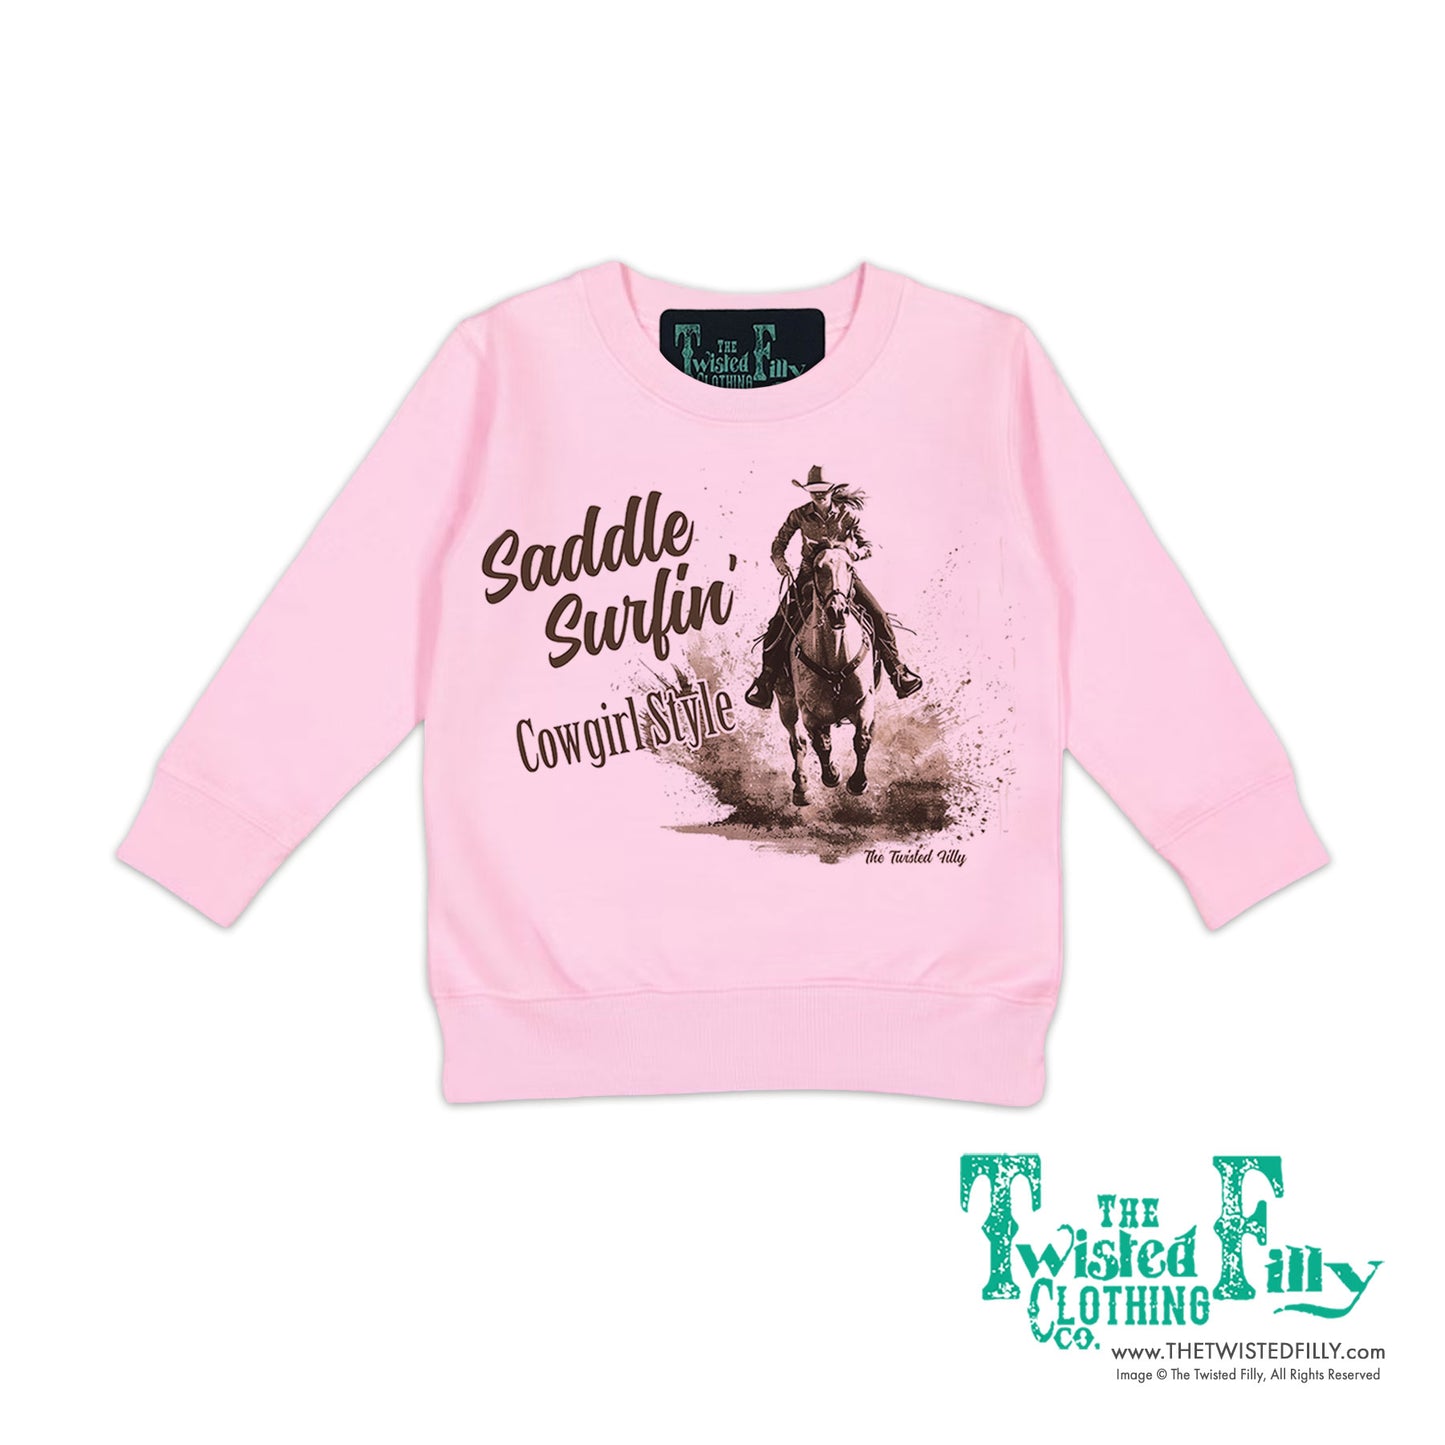 Saddle Surfin' Cowgirl Style - Toddler Girls Sweatshirt - Assorted Colors